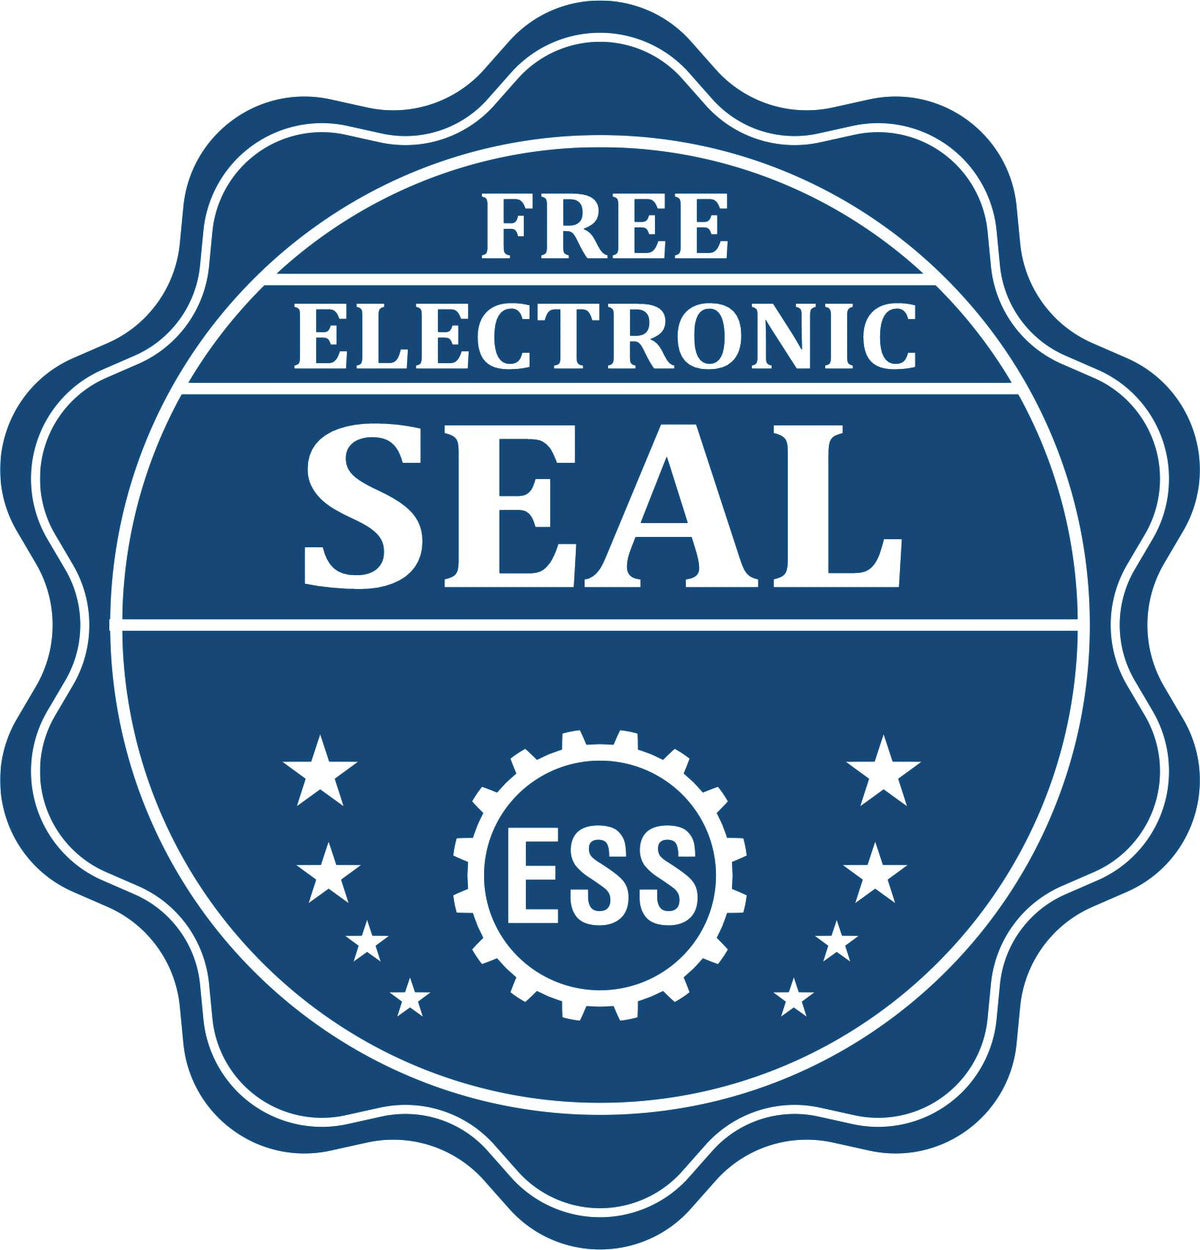 A badge showing a free electronic seal for the Gift New Jersey Architect Seal with stars and the ESS gear on the emblem.